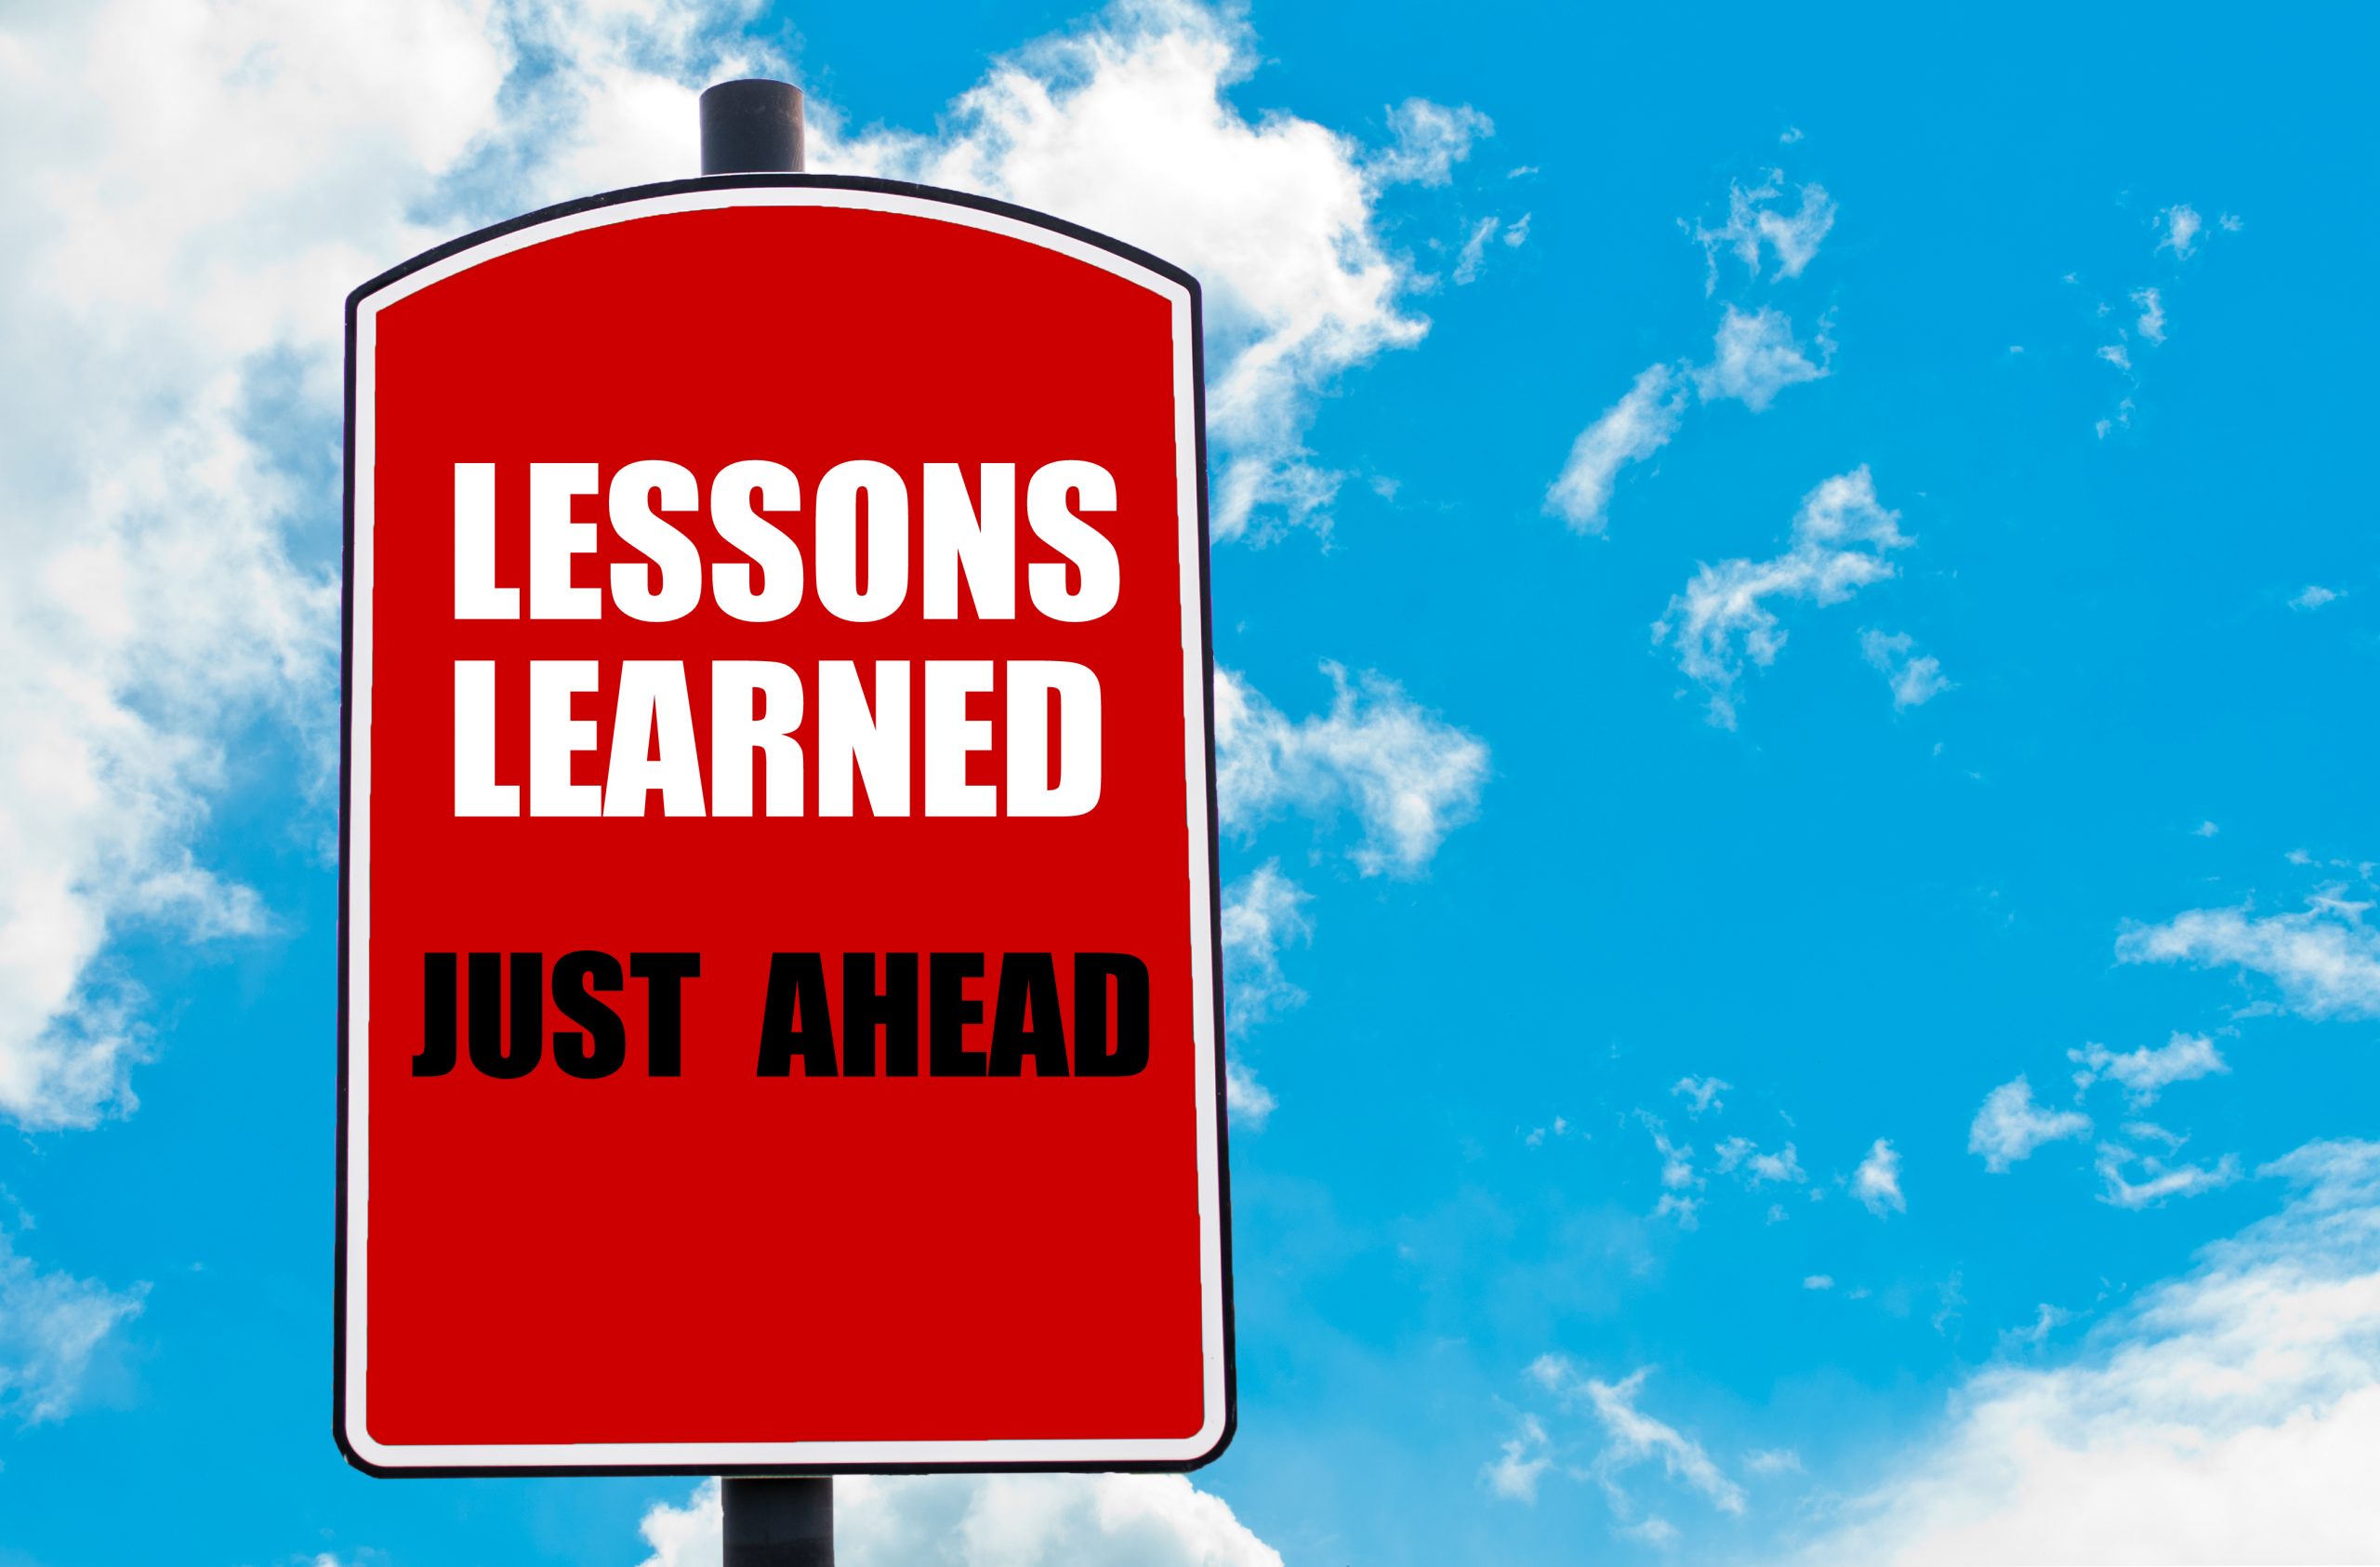 https://depositphotos.com/74355197/stock-photo-lessons-learned-just-ahead.html